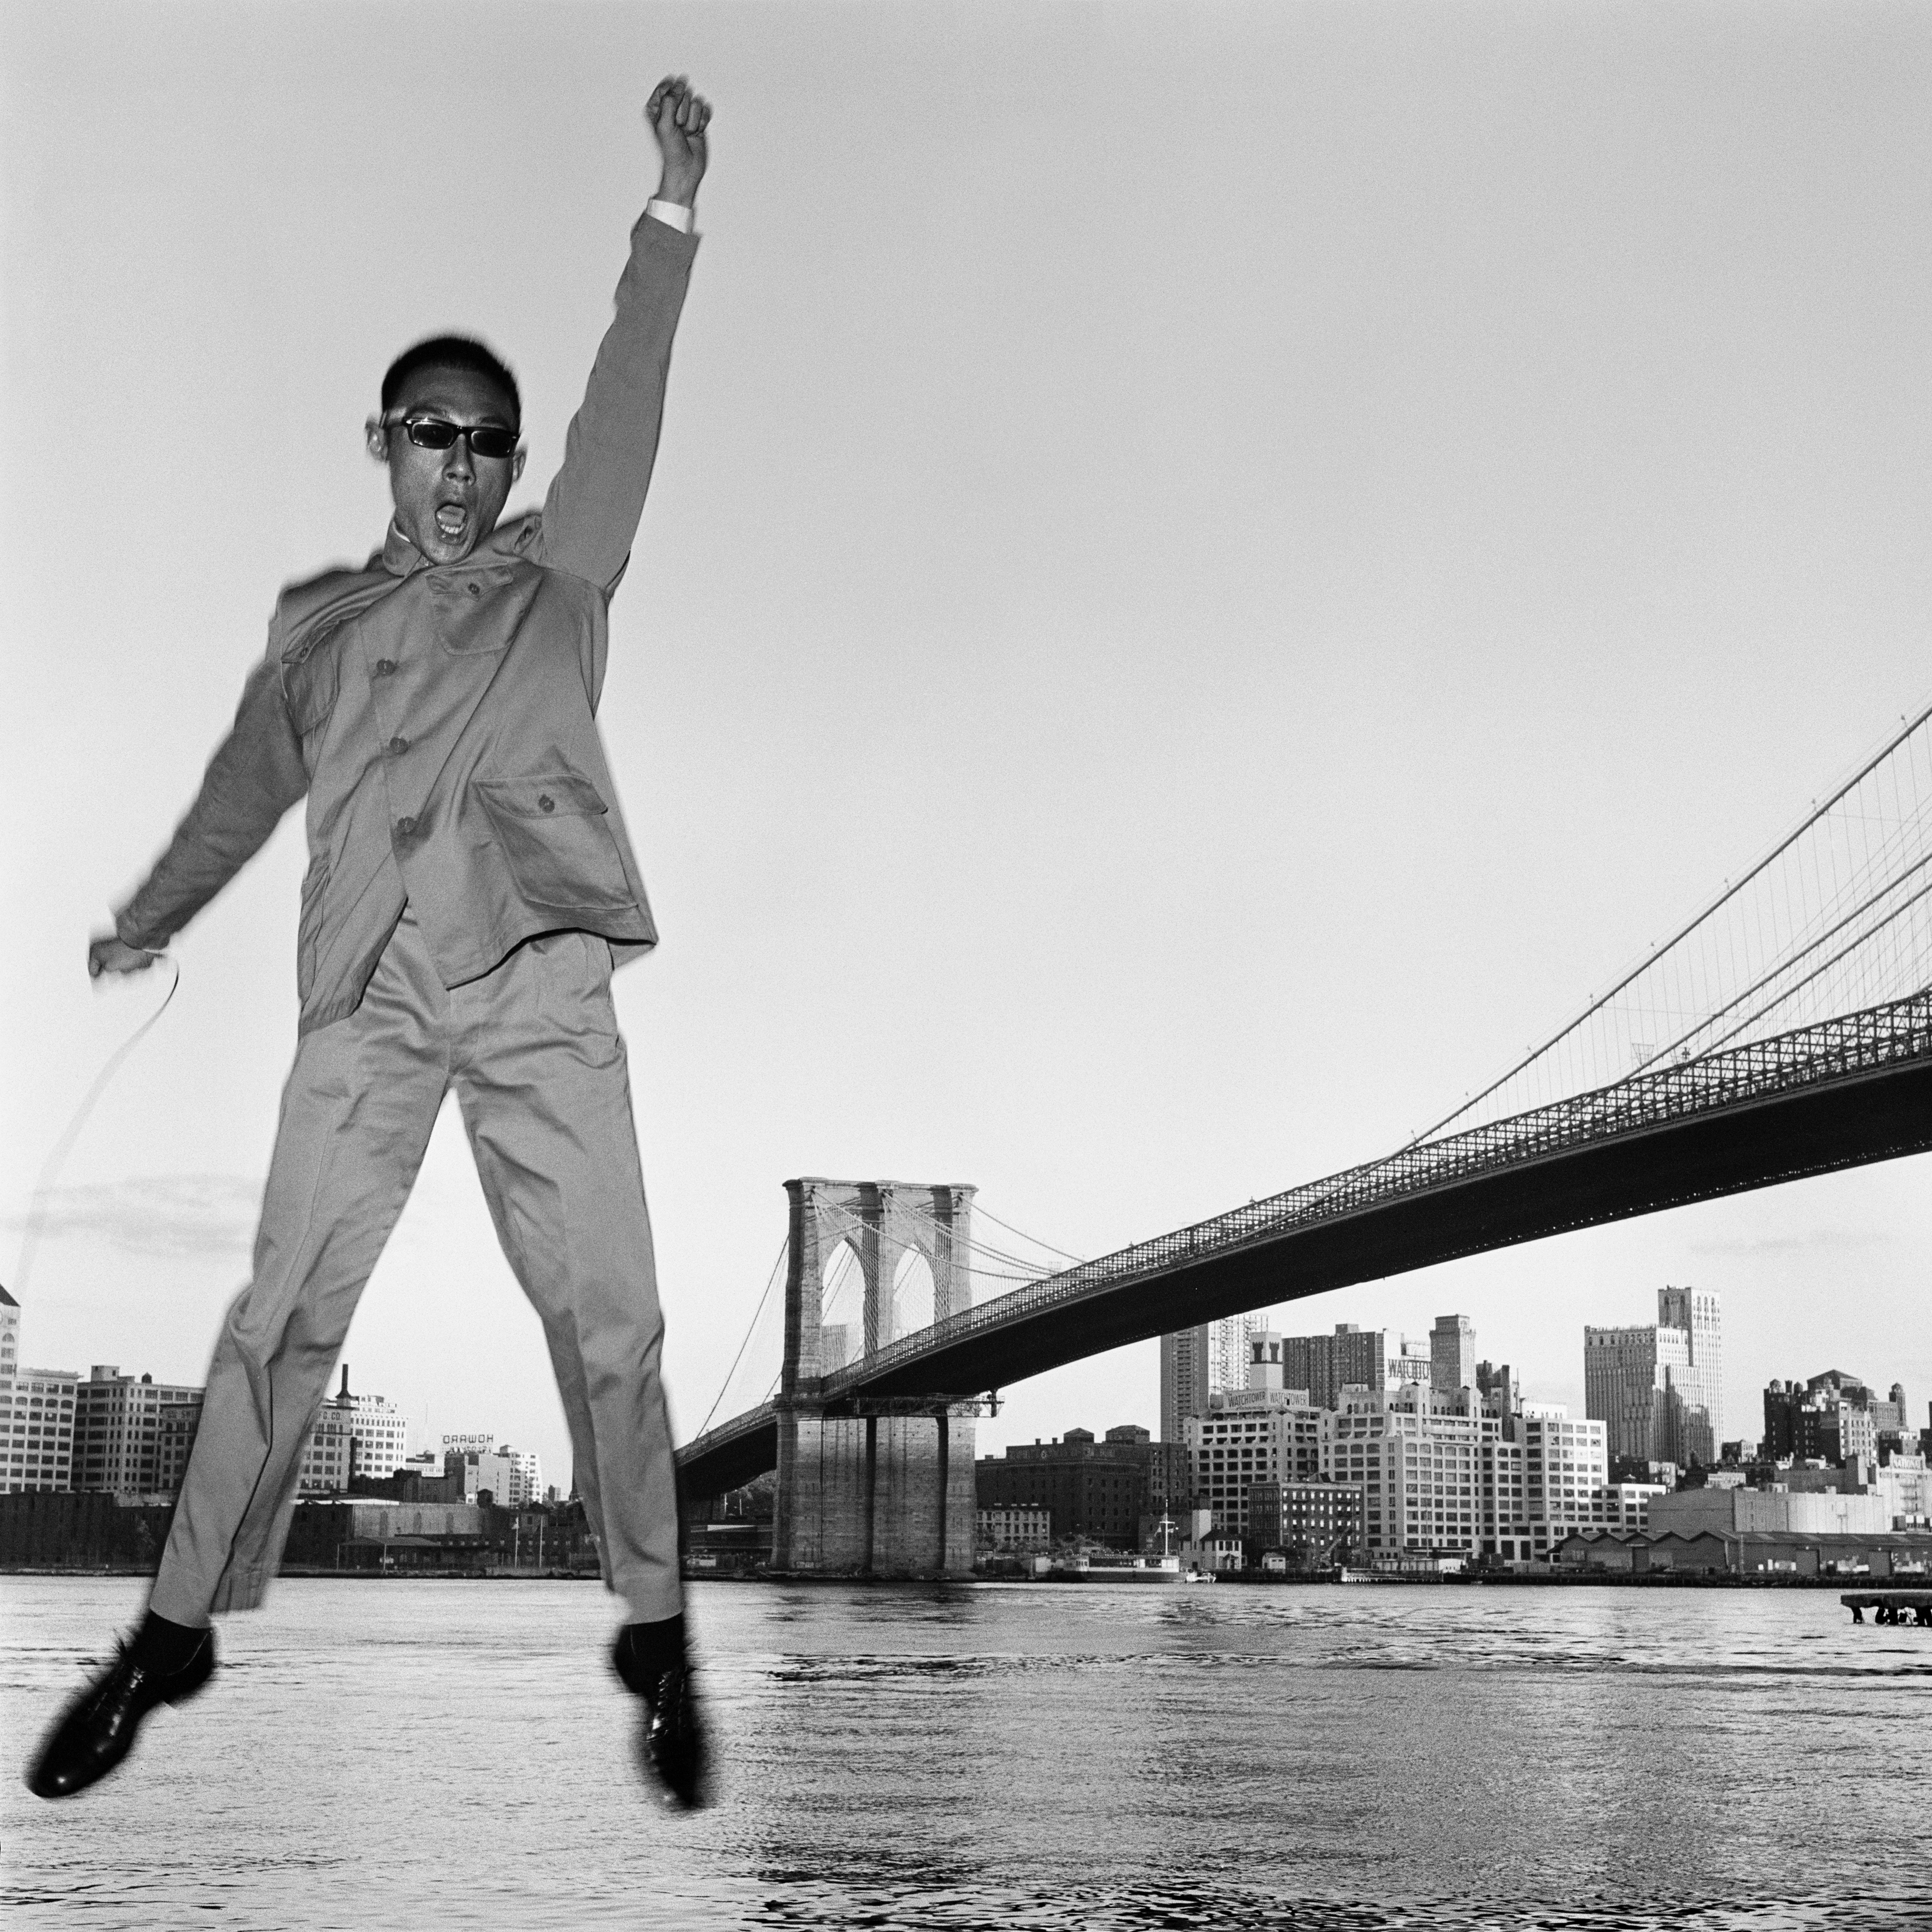 a man in a Zhongshan suit jumps in the air, taking a self portrait in front of a bridge in new york